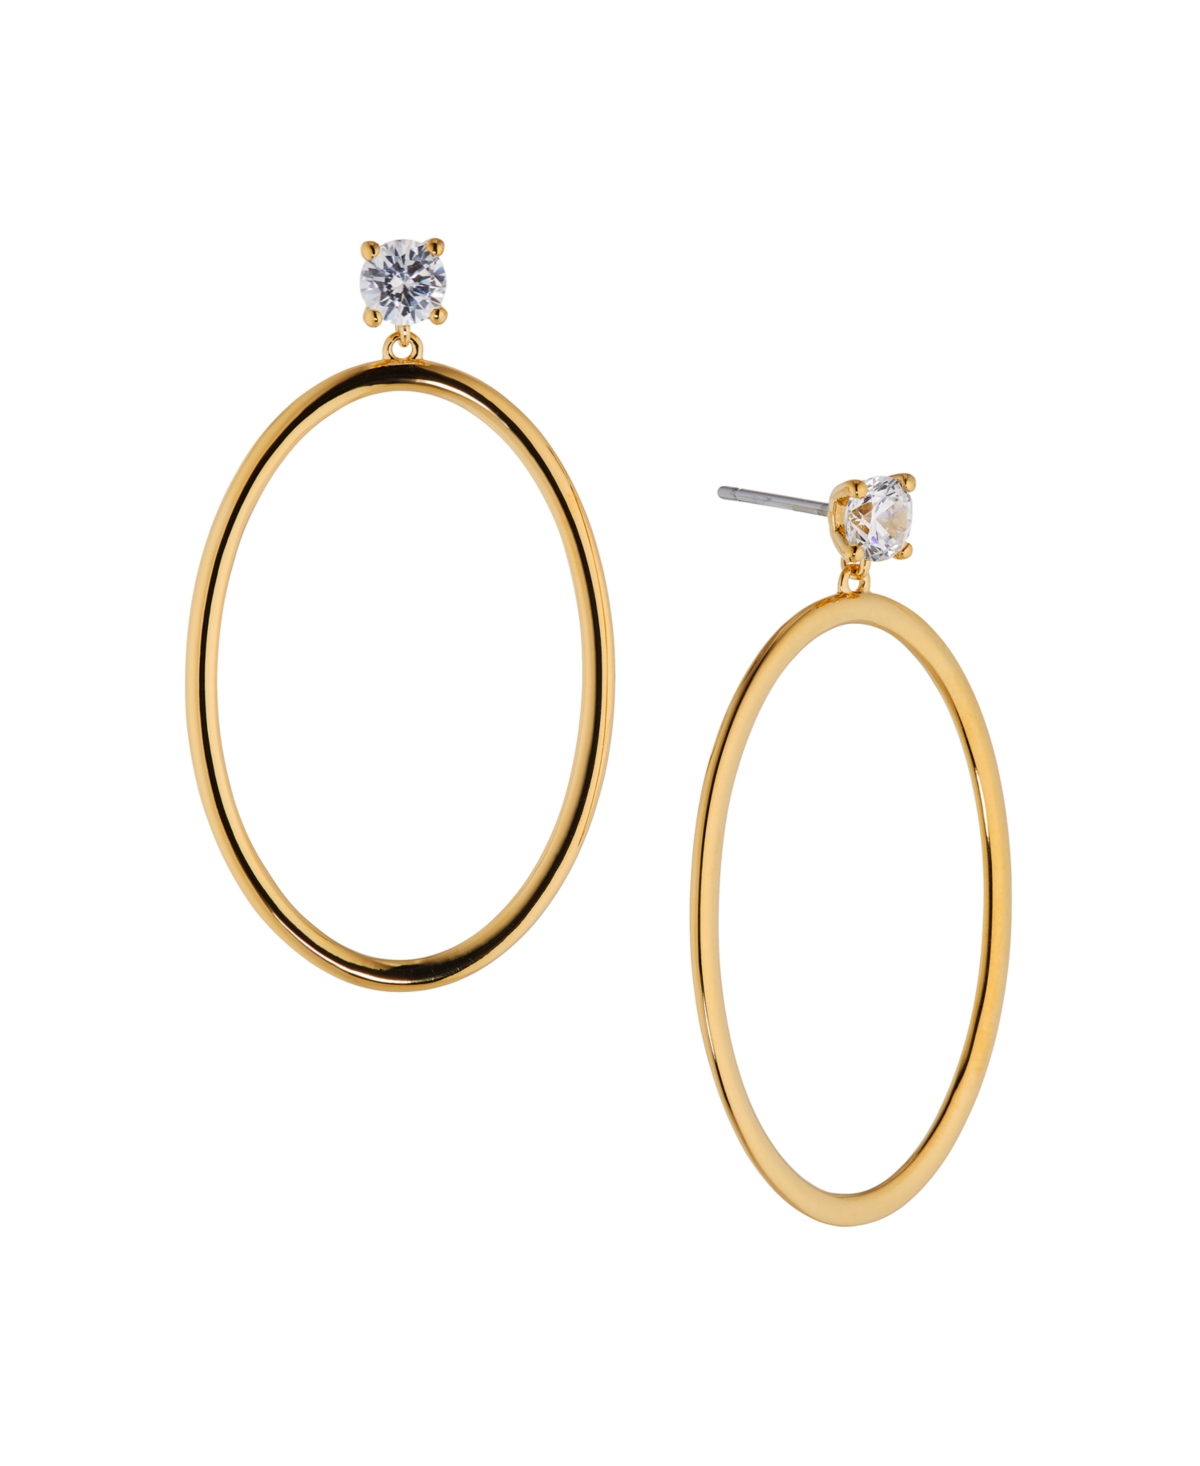 Ava Nadri Stud With Oval Metal Drop Earring In Silver-tone Brass In K Gold Plated